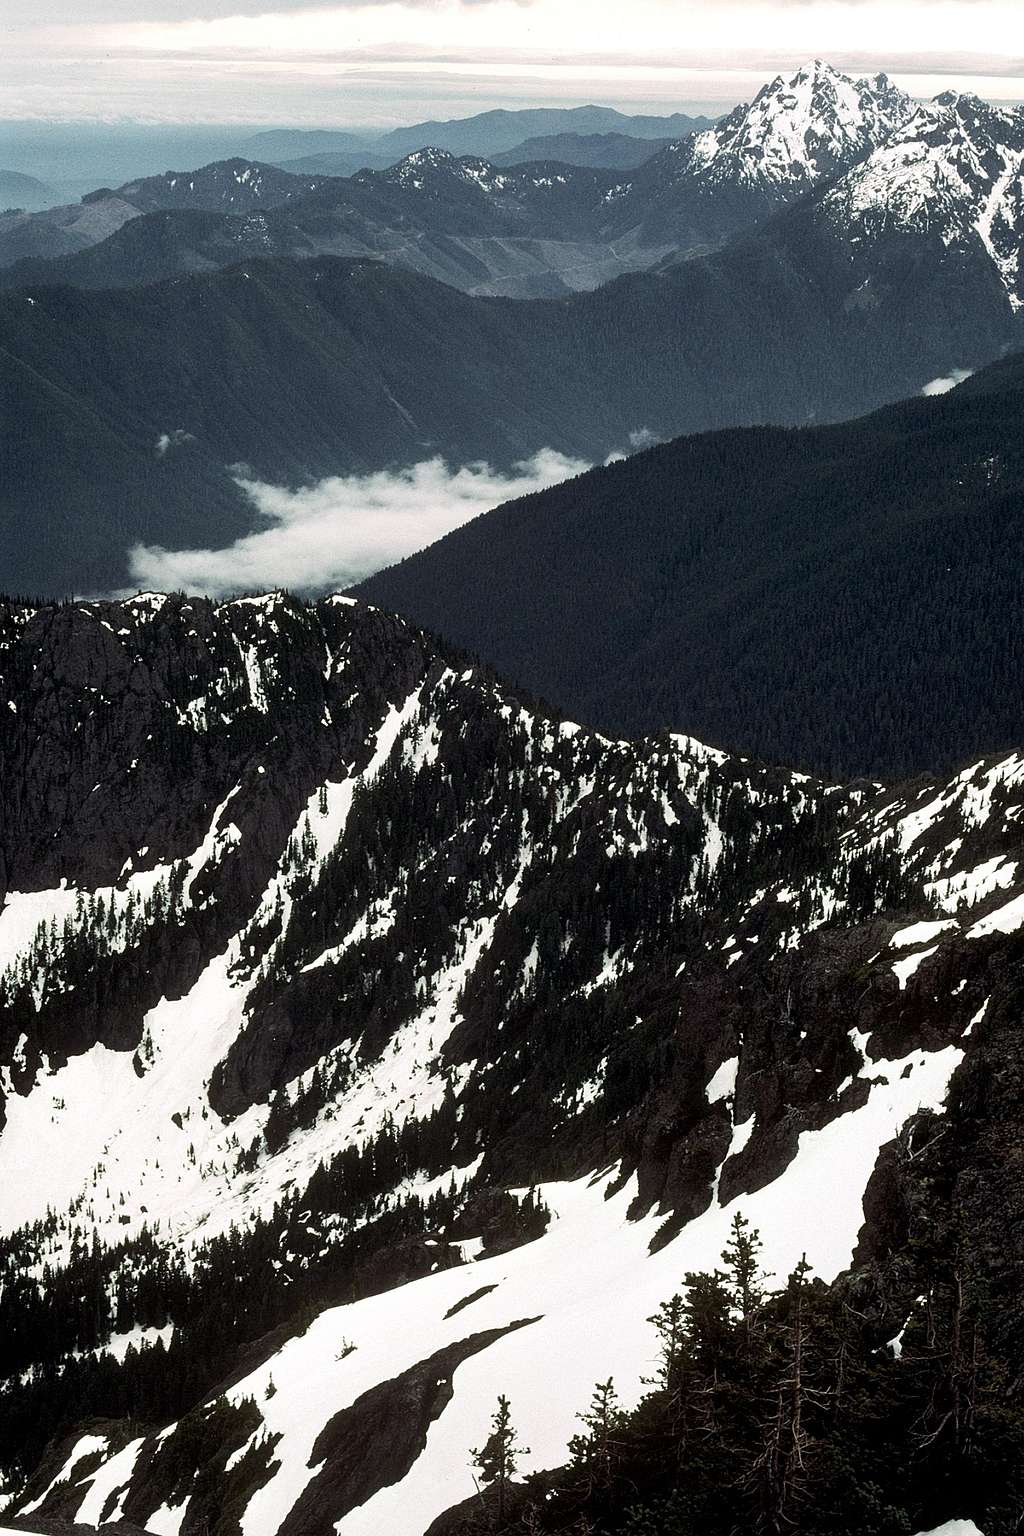 Looking down from summit of South Brother